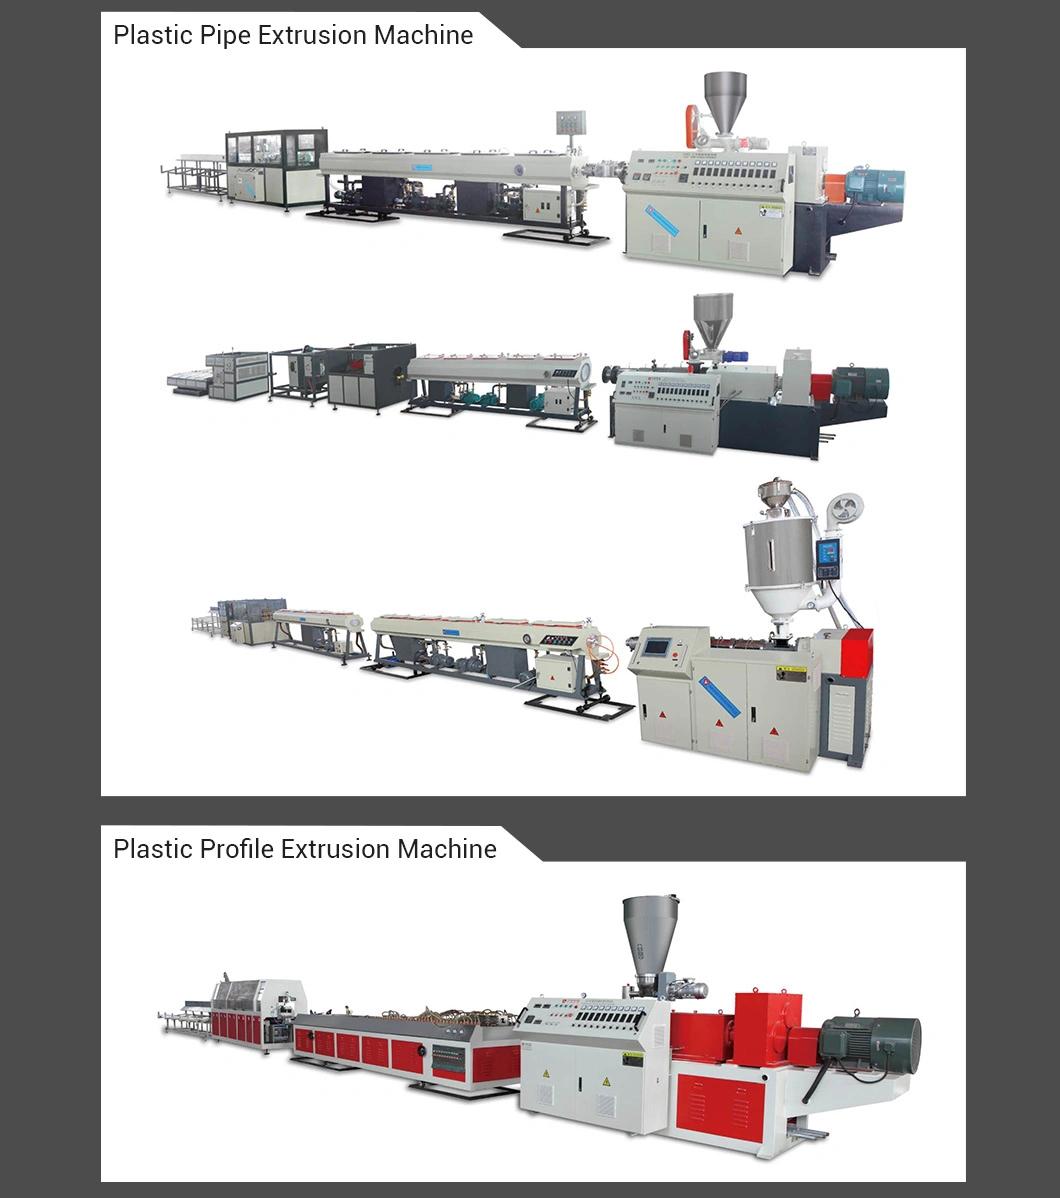 Yatong Automatic HDPE Pipe Extrusion Line Plastic Machine